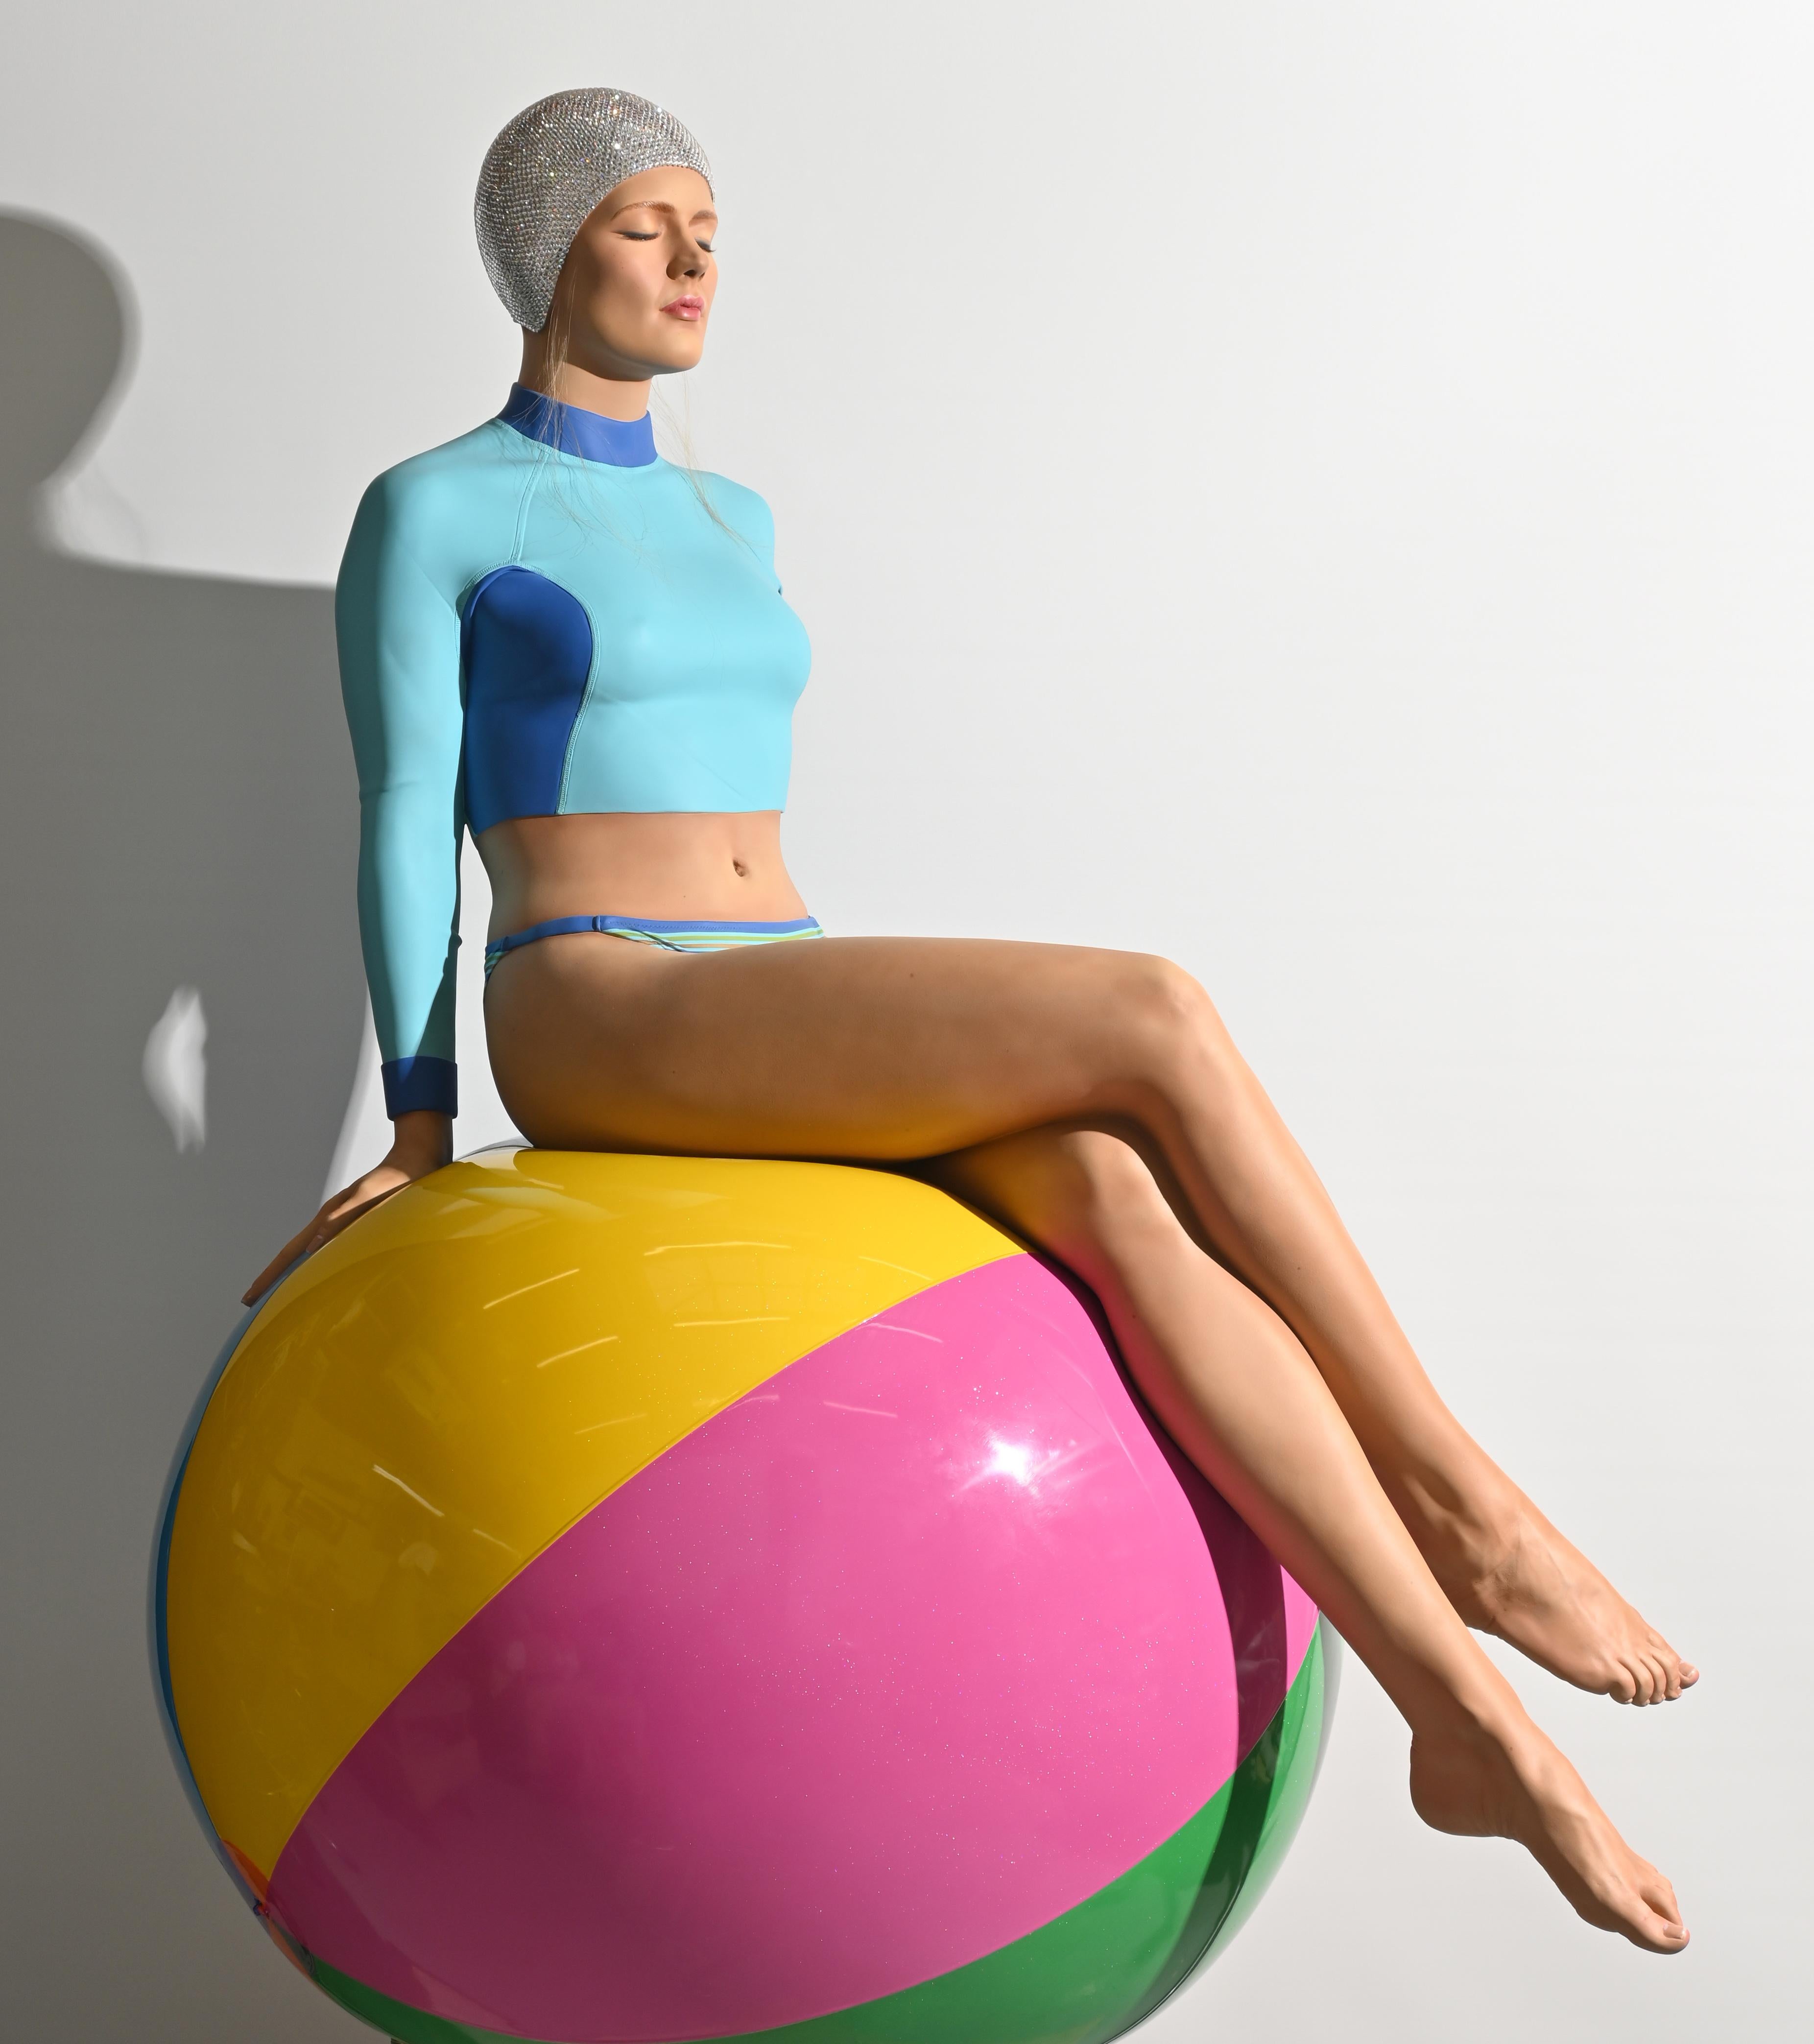 Bibi on the Ball - Life-Size - Indoor/Outdoor - Contemporary Mixed Media Art by Carole A. Feuerman